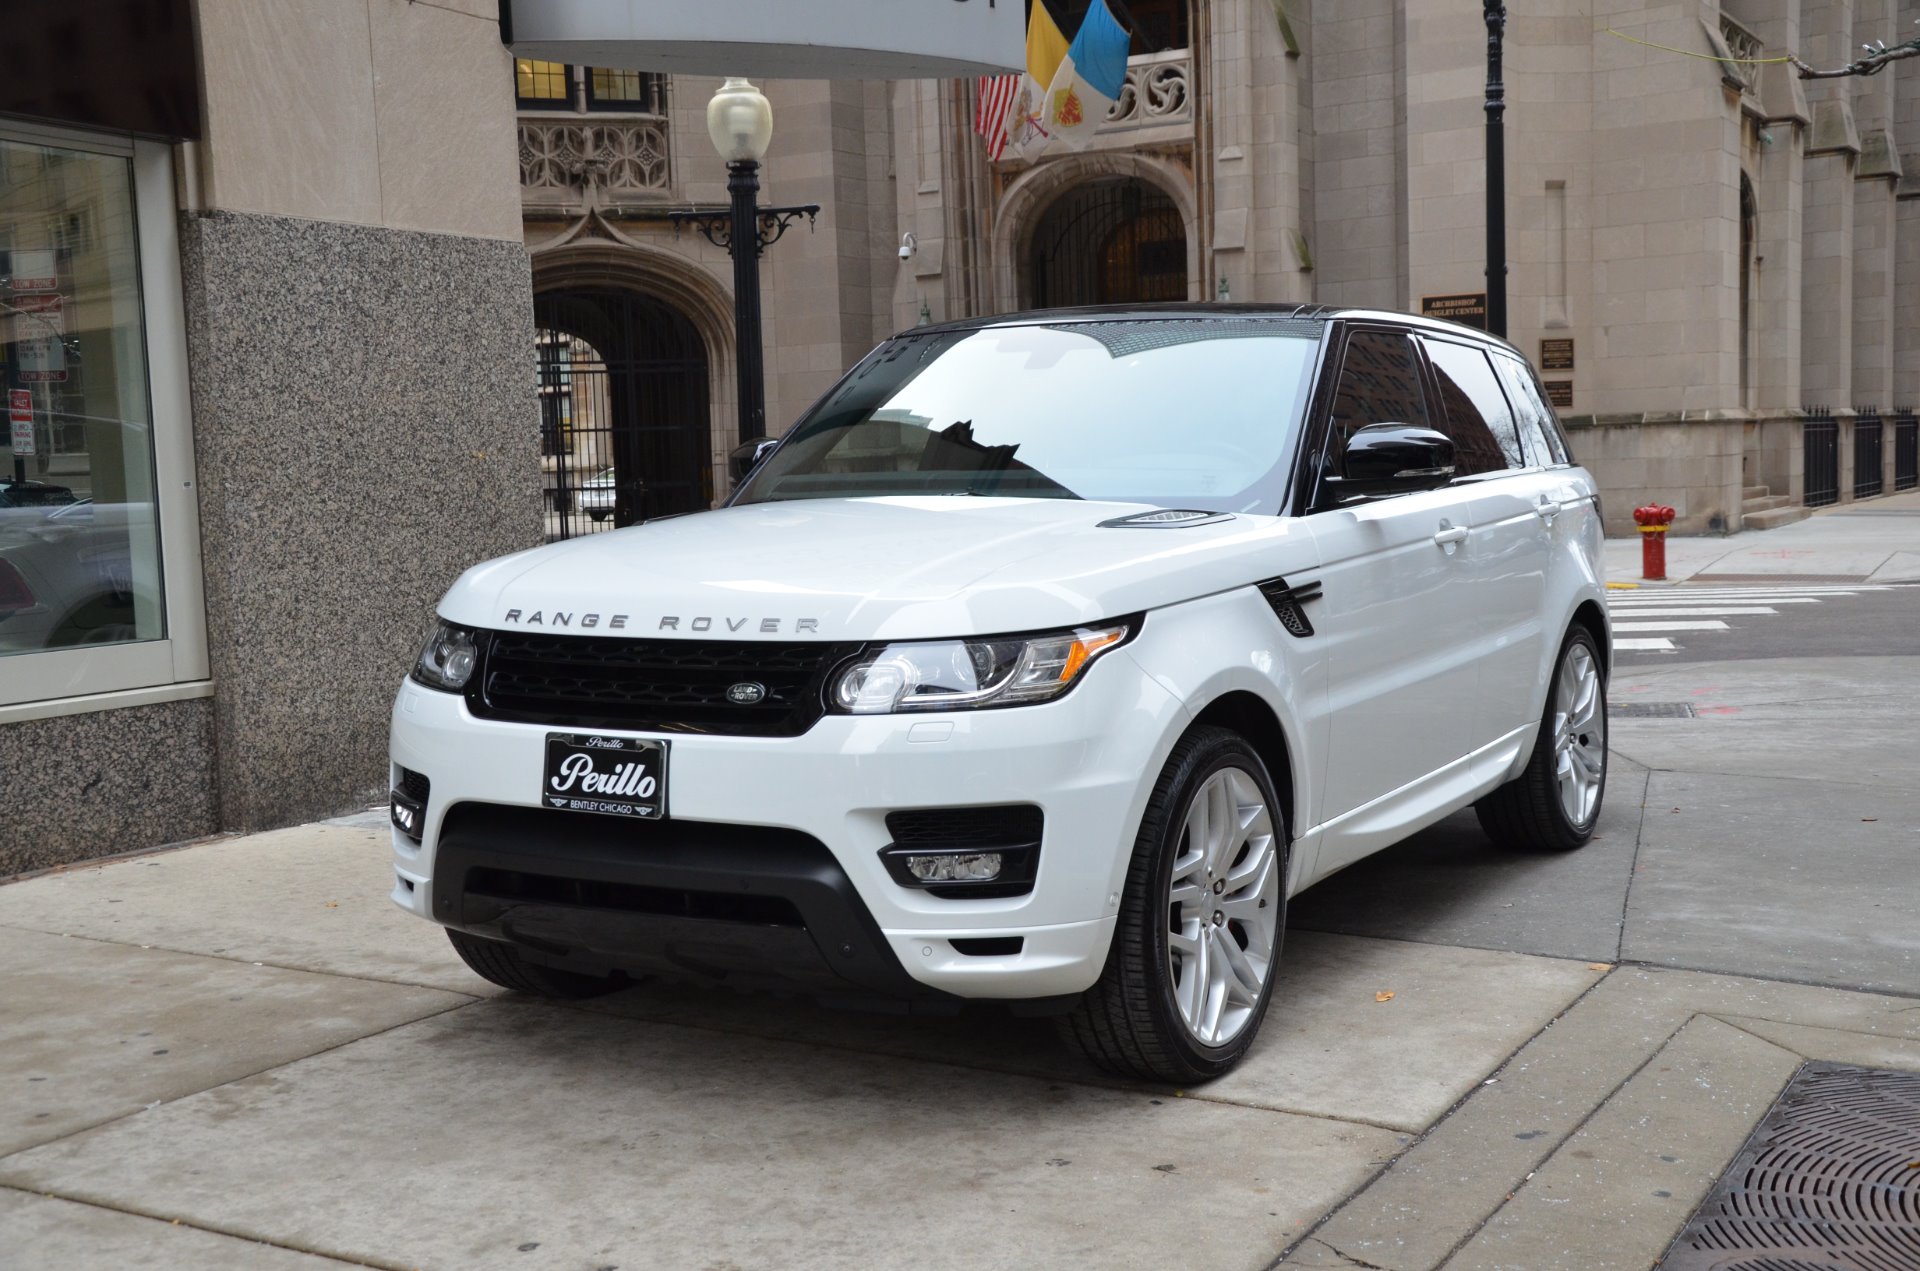 Used 2015 Land Rover Range Rover Sport Autobiography For Sale (Sold) |  Bentley Gold Coast Chicago Stock #B827A-S